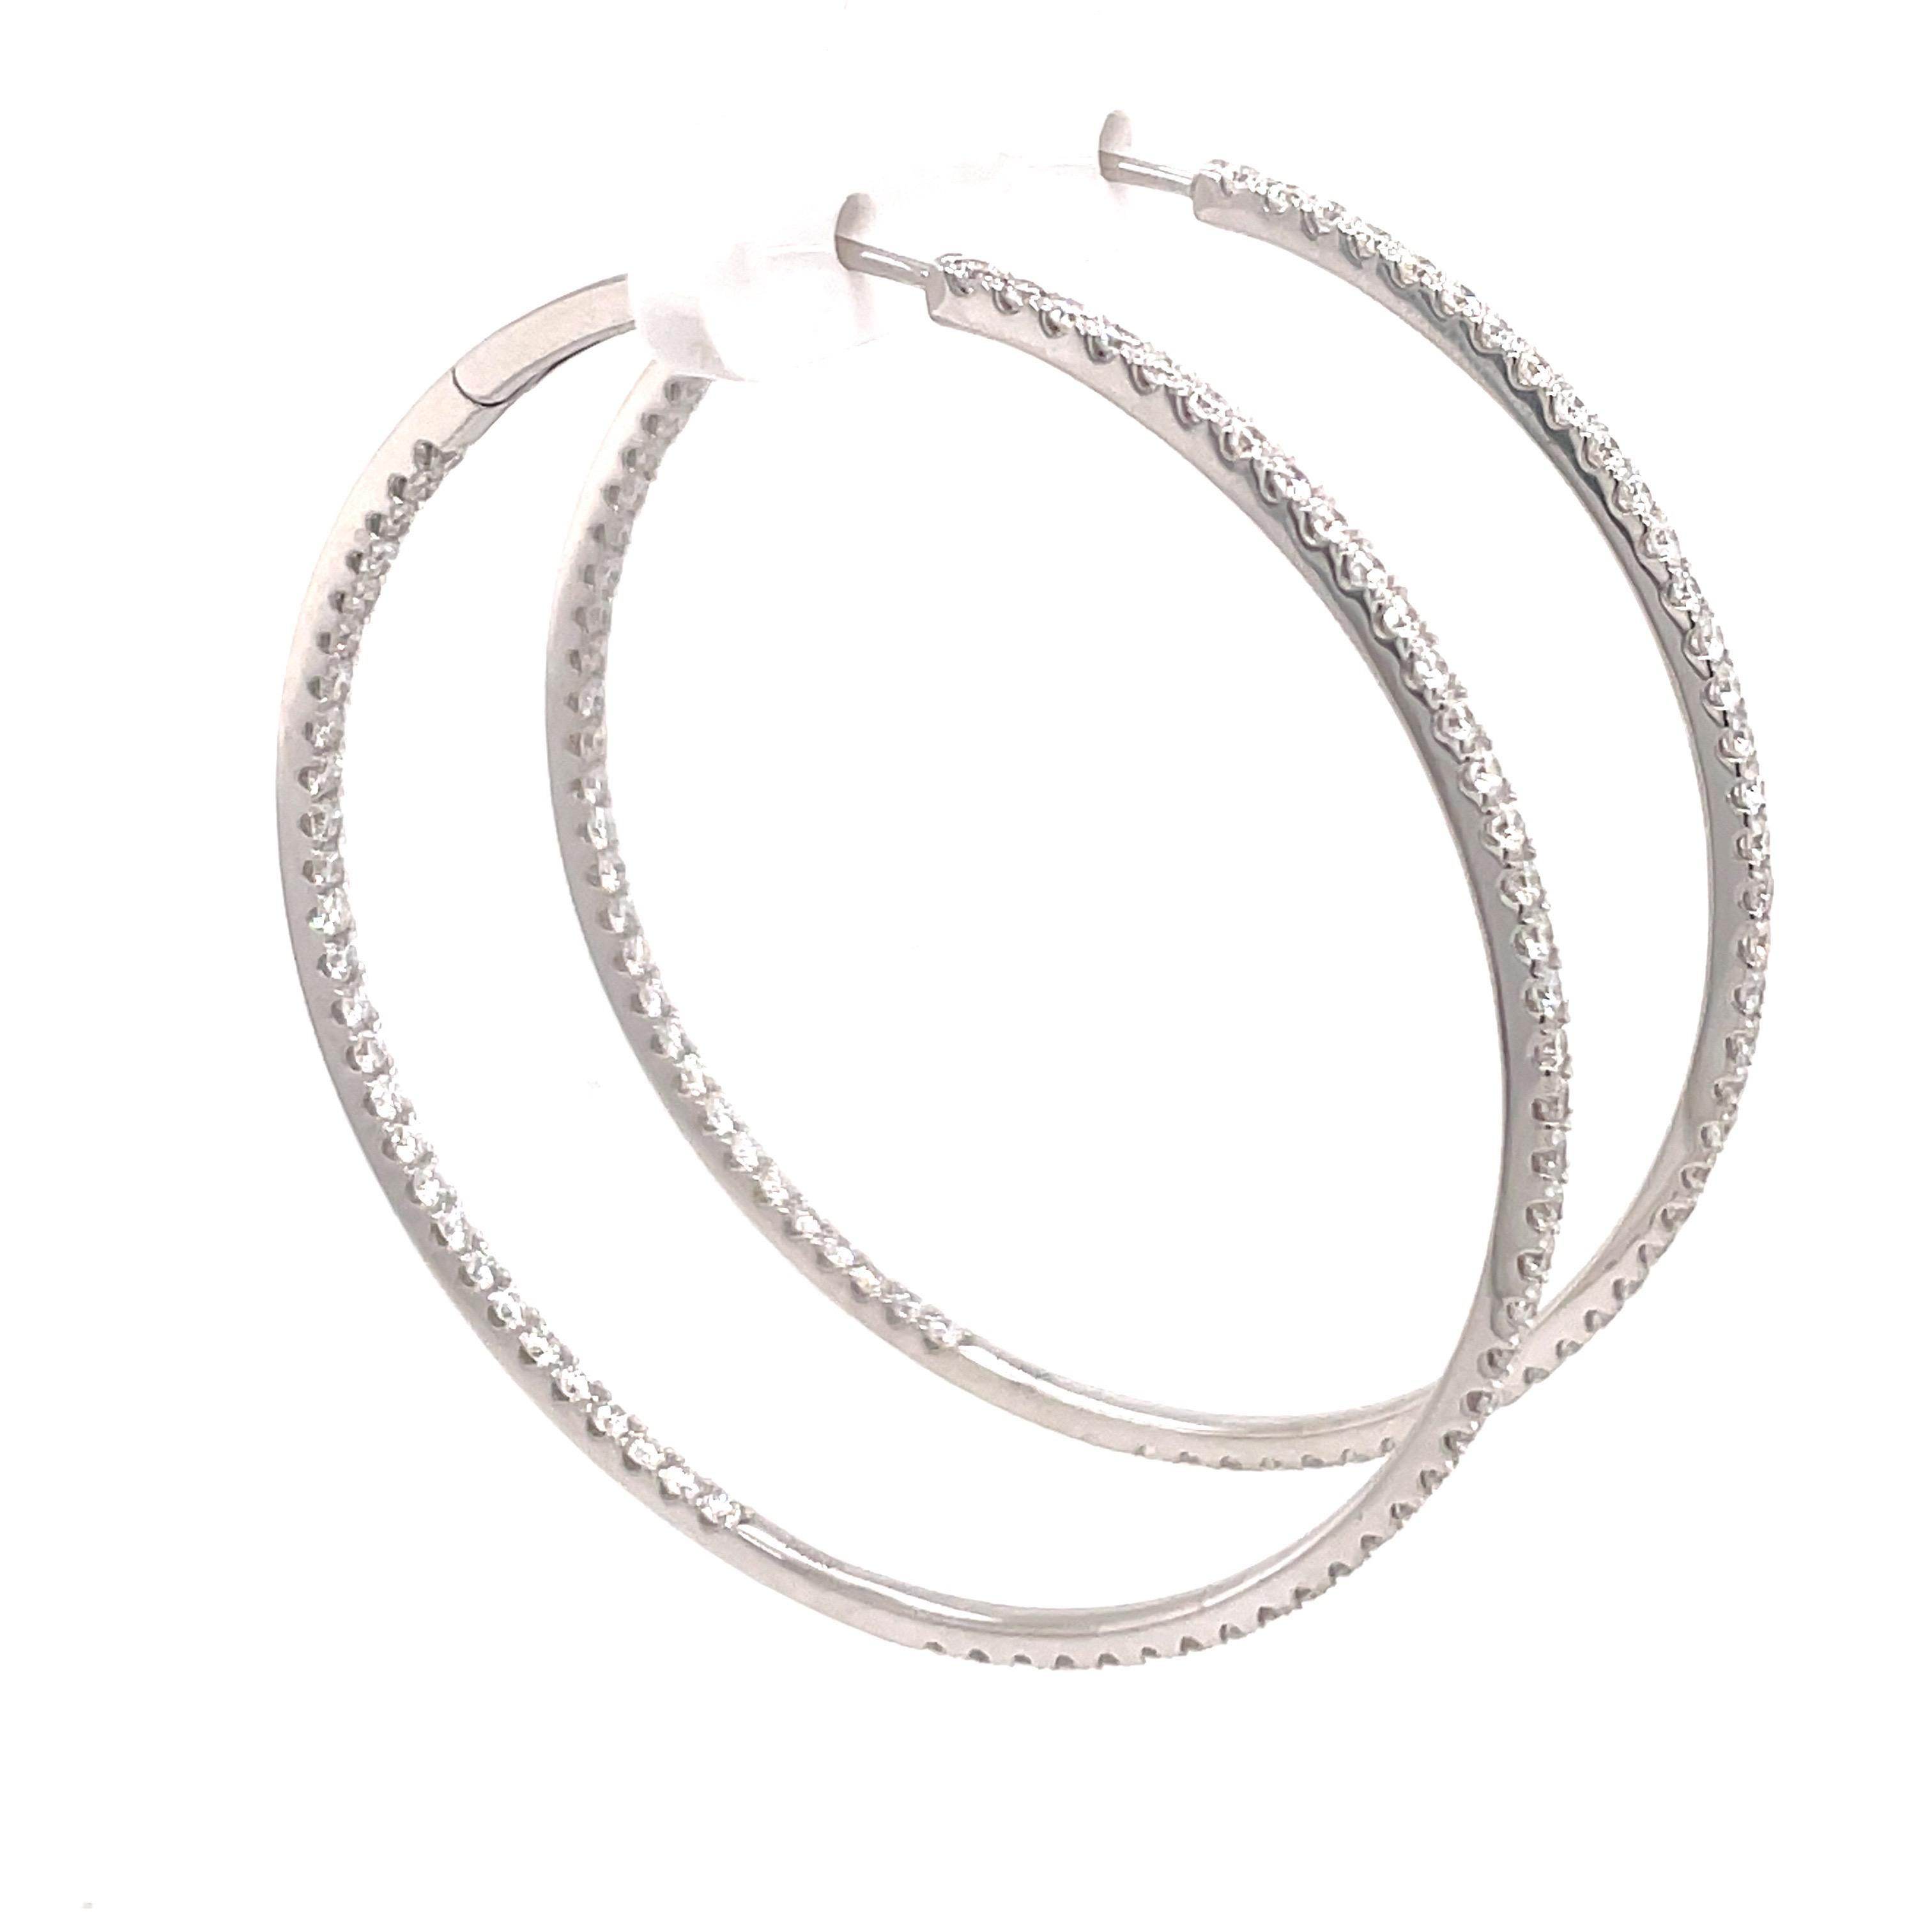 Contemporary Diamond Hoop Earrings 2.30 Carats 14 Karat White Gold 11 Grams For Sale